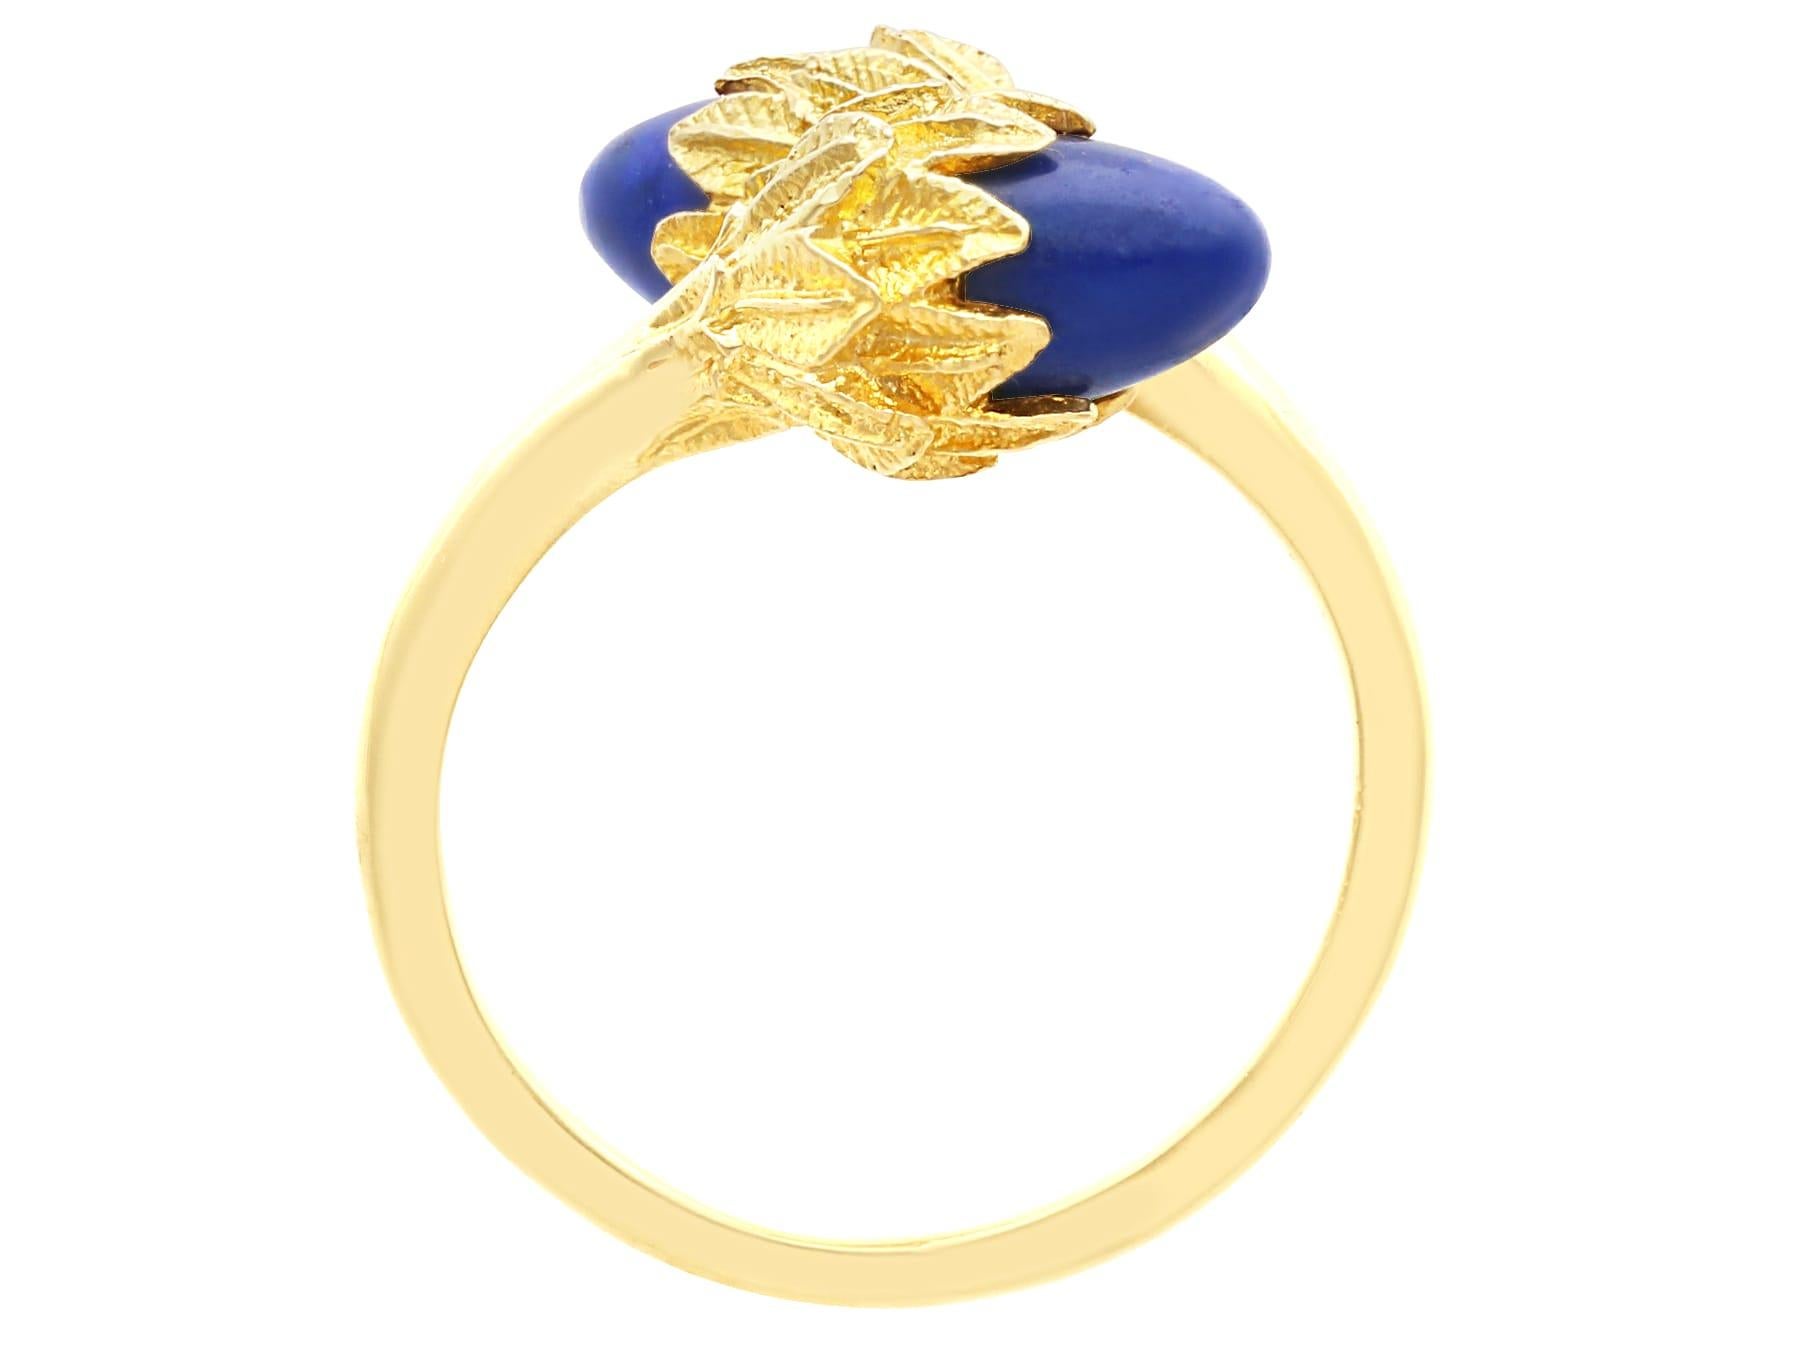 Vintage 1.32 Carat Lapis Lazuli and 14k Yellow Gold Dress Ring In Excellent Condition For Sale In Jesmond, Newcastle Upon Tyne